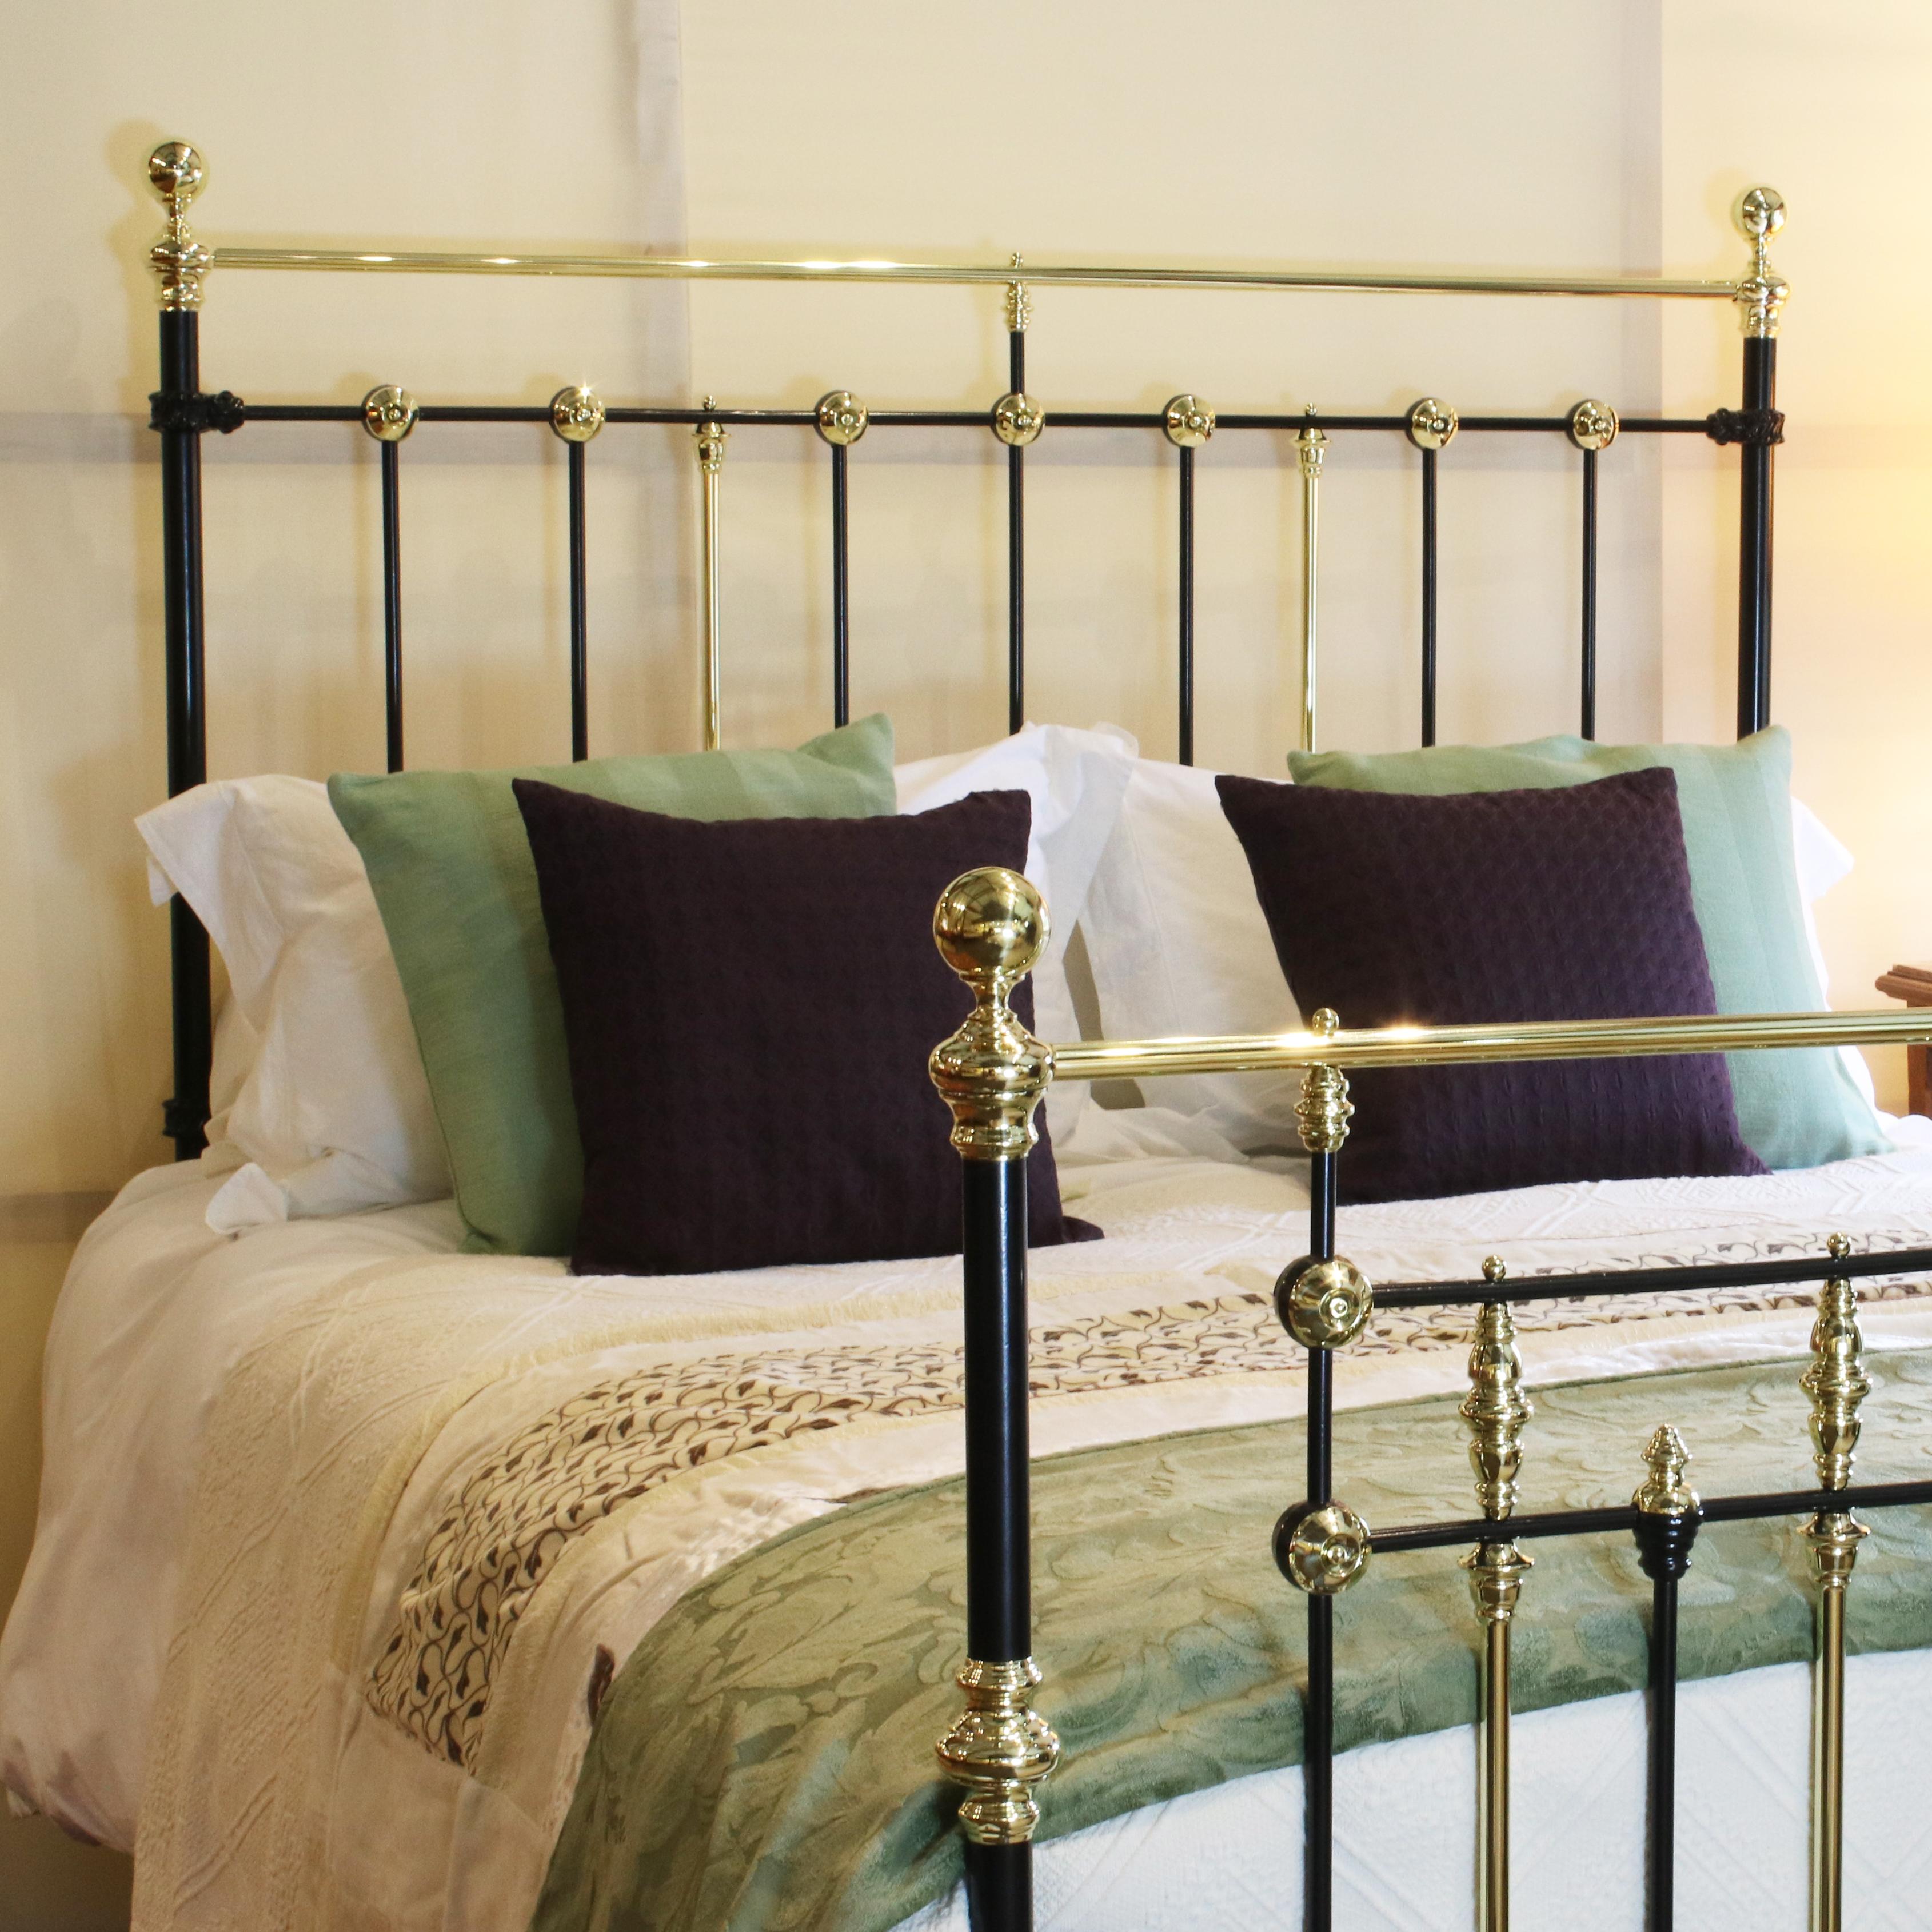 Fine example of a quality Victorian cast iron and brass bed, finished in black with brass ring and rosette decoration.

This bed accepts a British King Size or American Queen Size (5ft wide, 60 inches or 150cm) base and mattress set.

The price